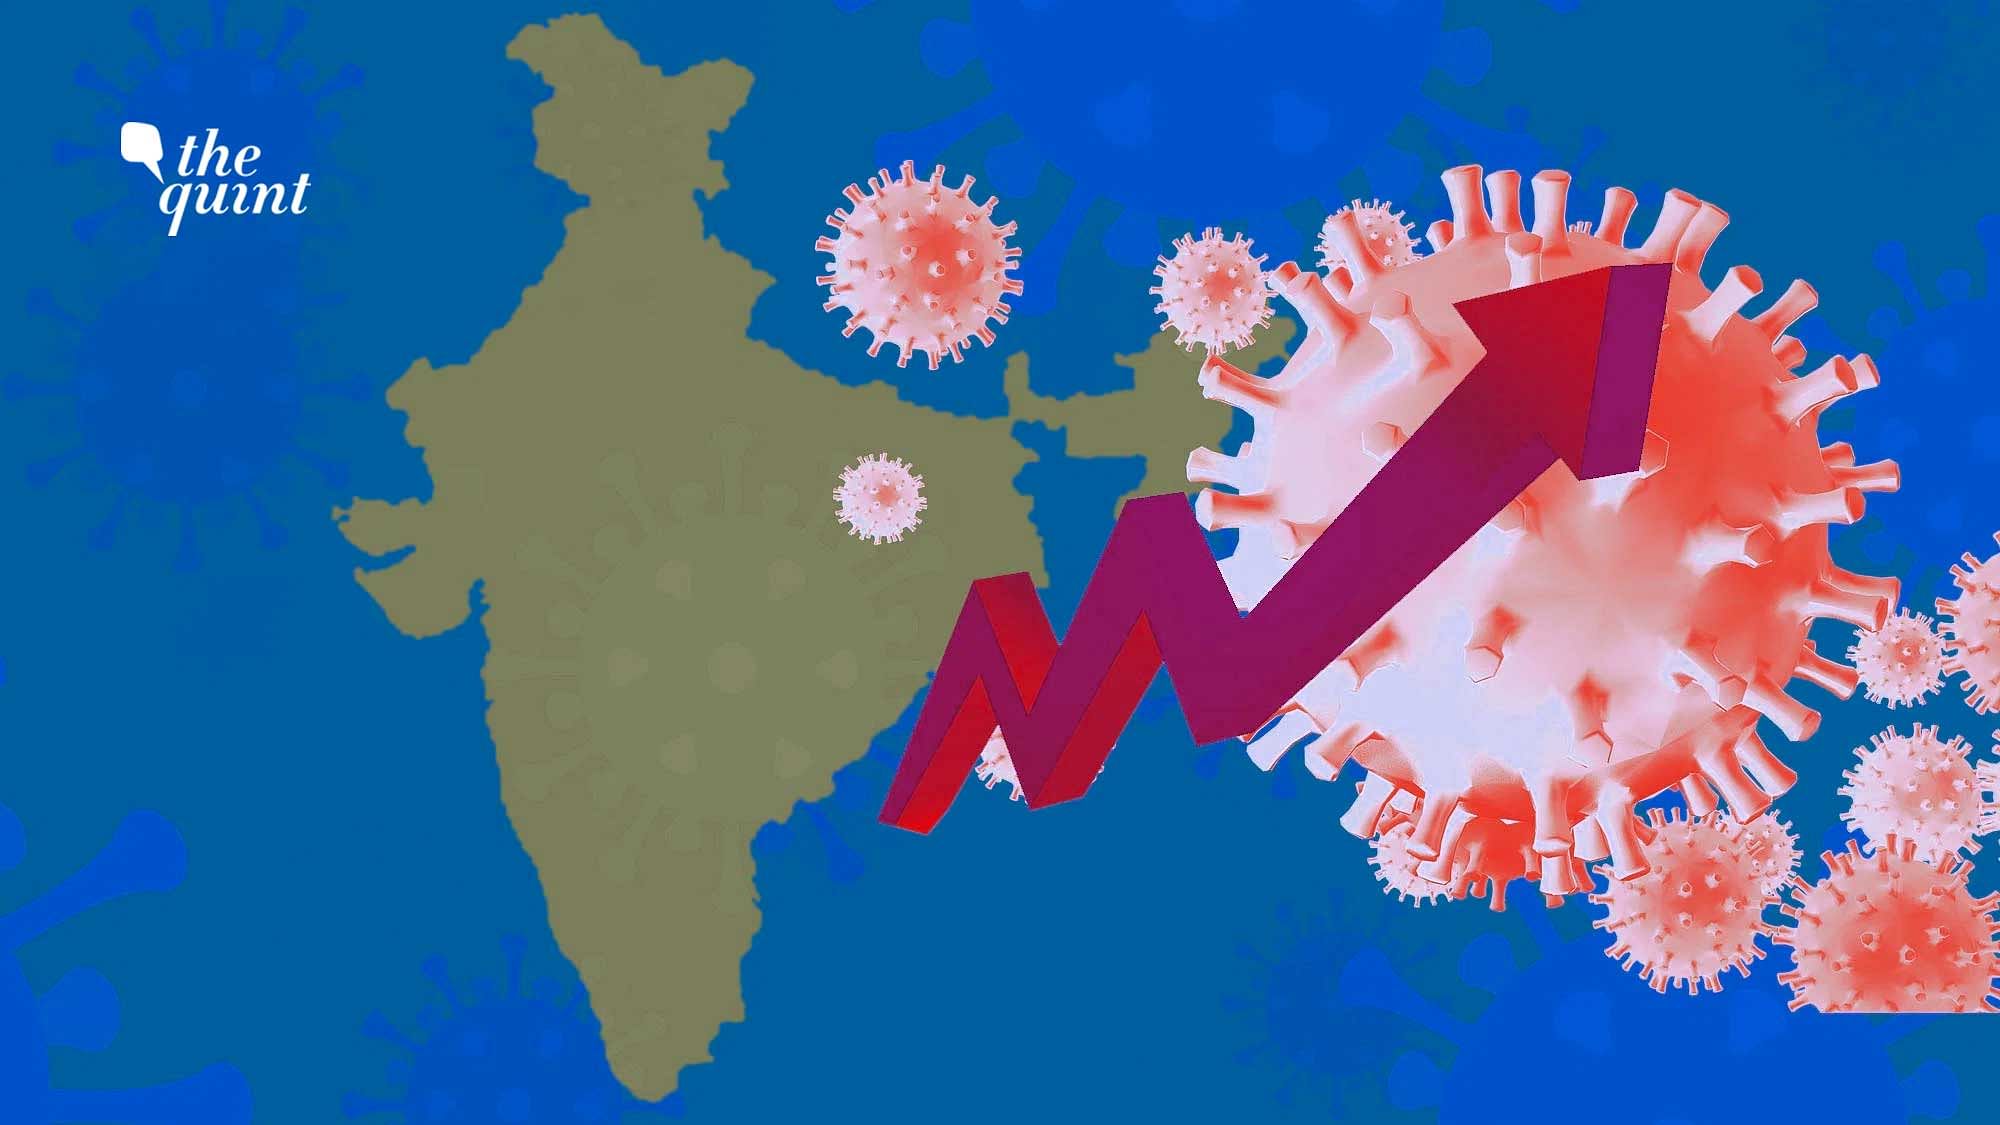 Image of India’s map and the coronavirus used for representational purposes.